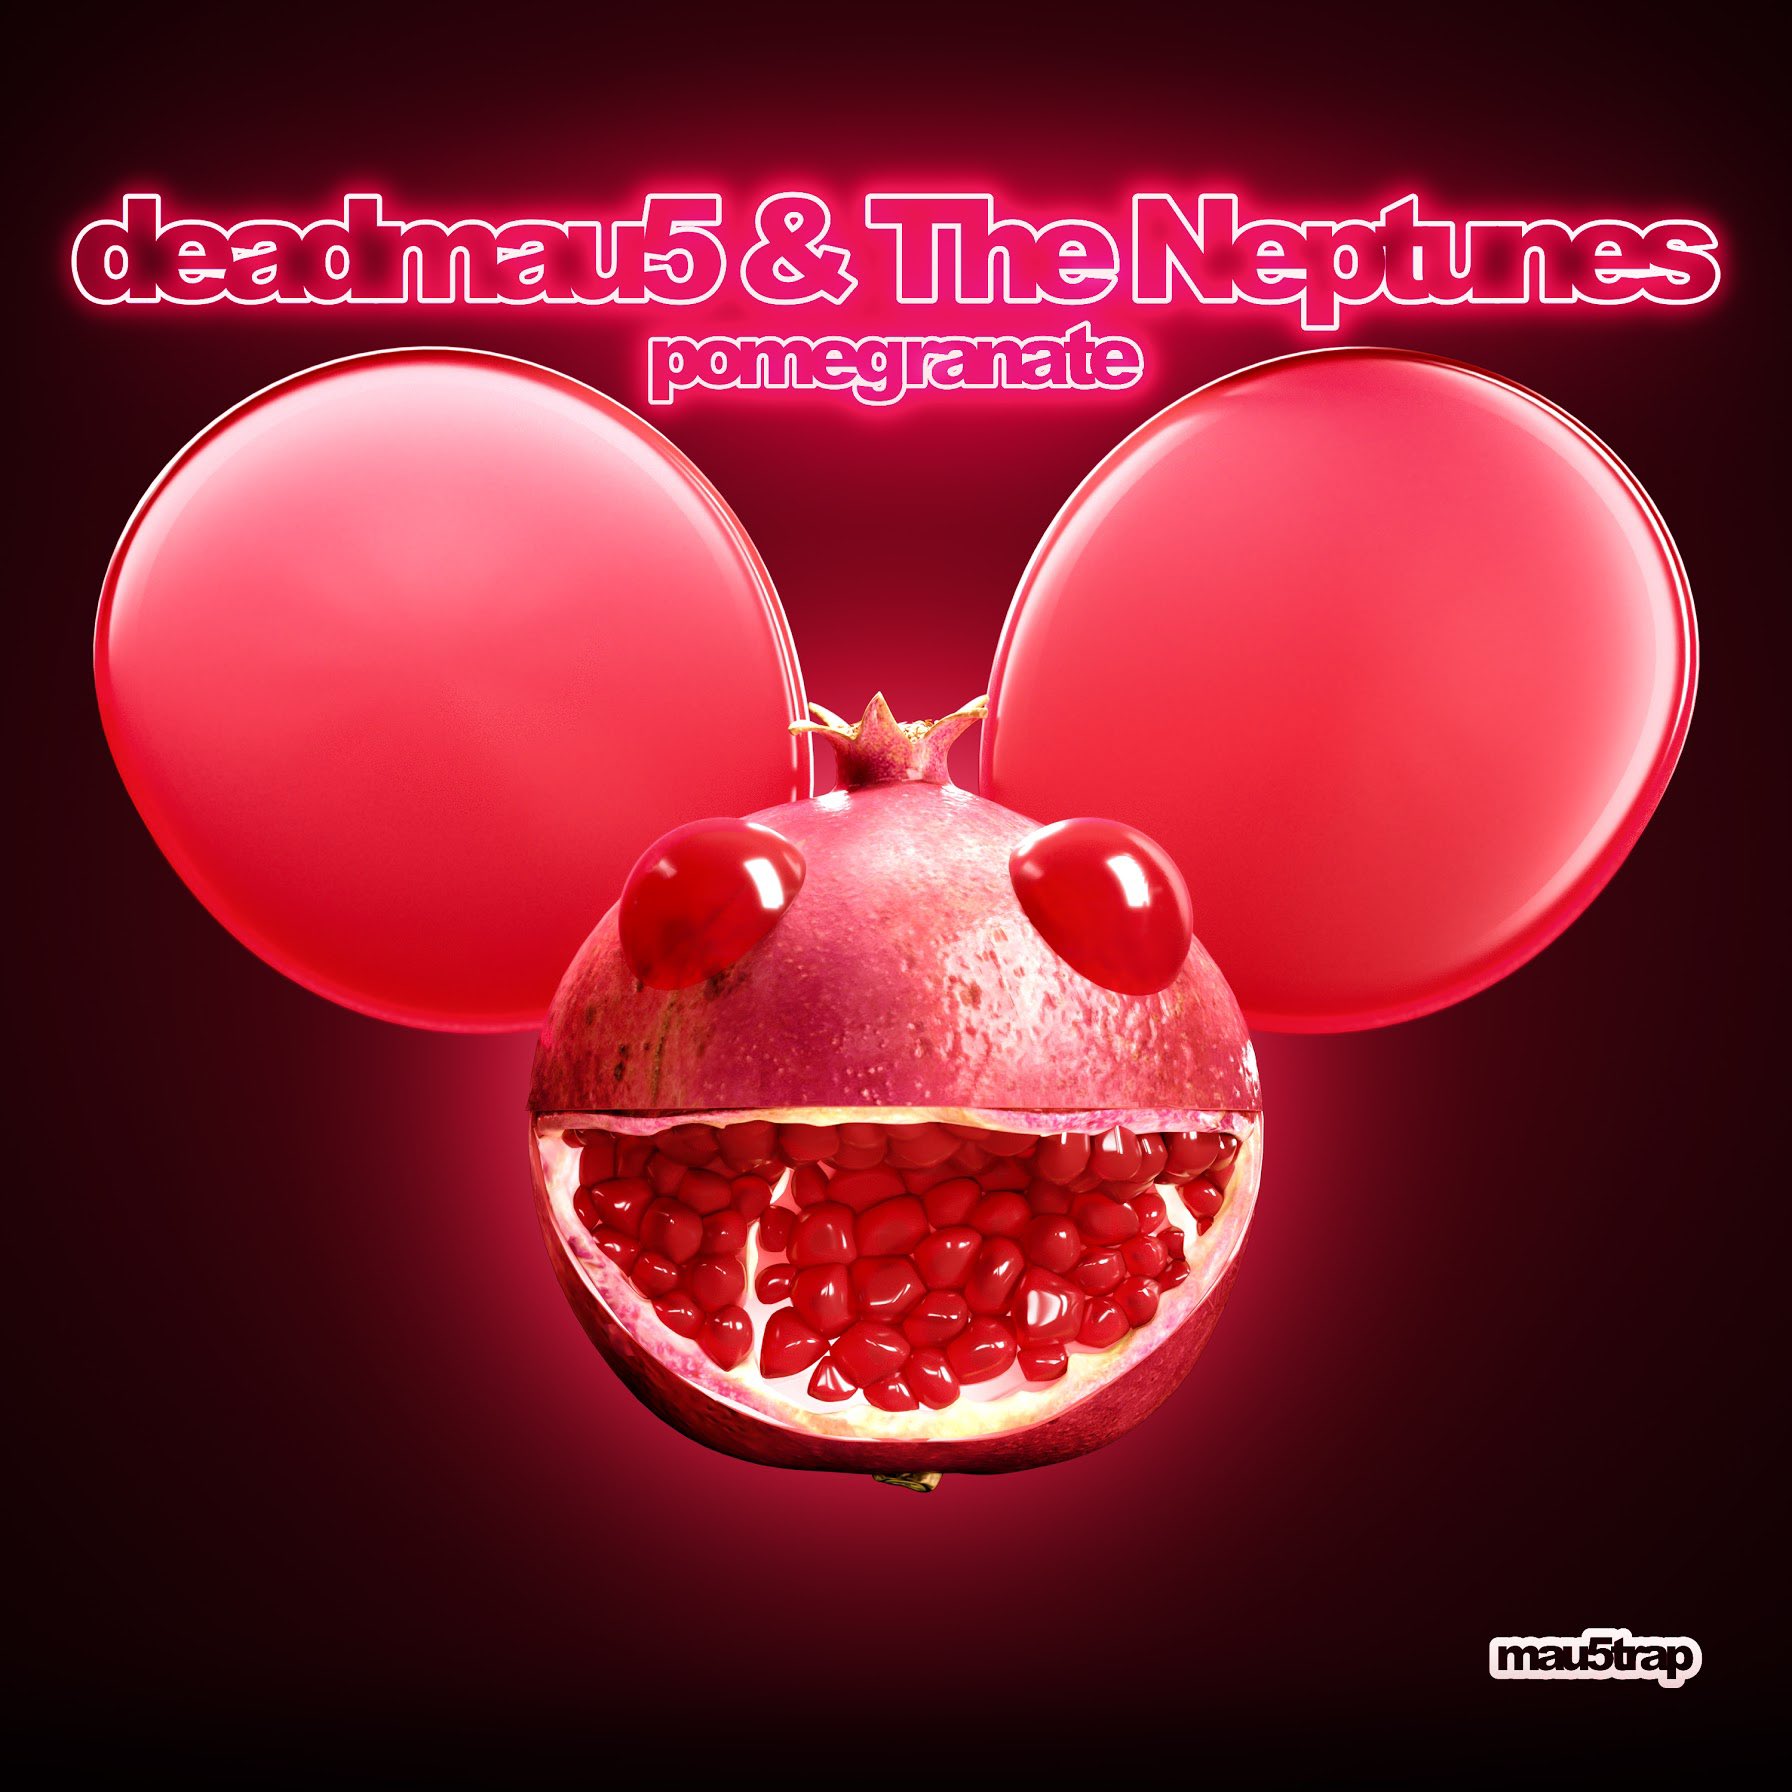 The Neptunes Collaborate With Deadmau5 On Party Jam “Pomegranate”